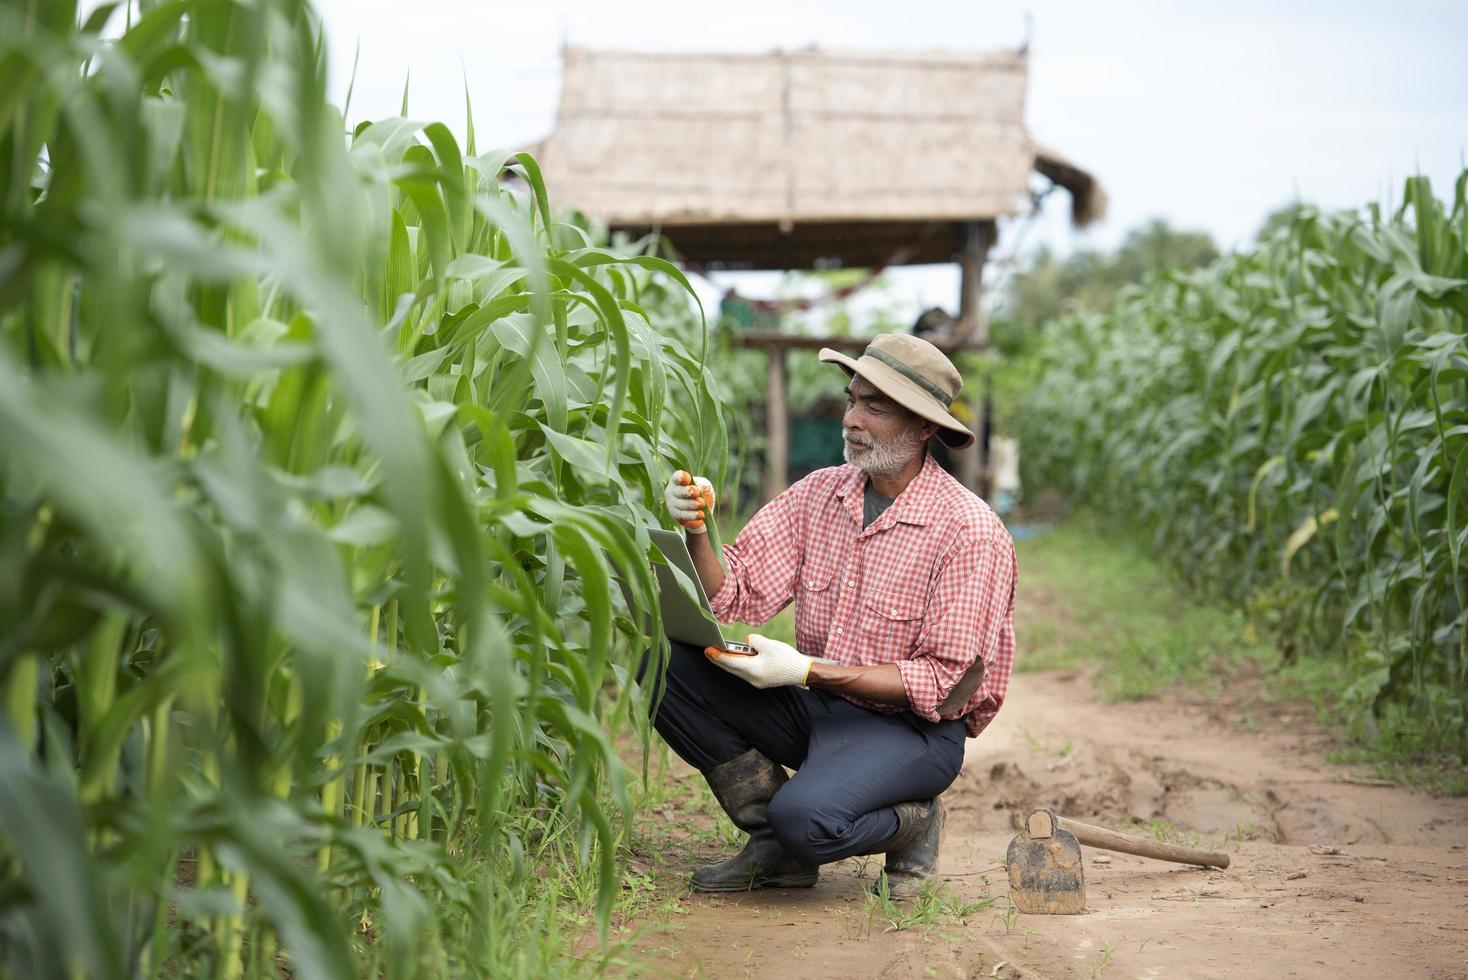 Older farmers use technology in agricultural corn fields. photo